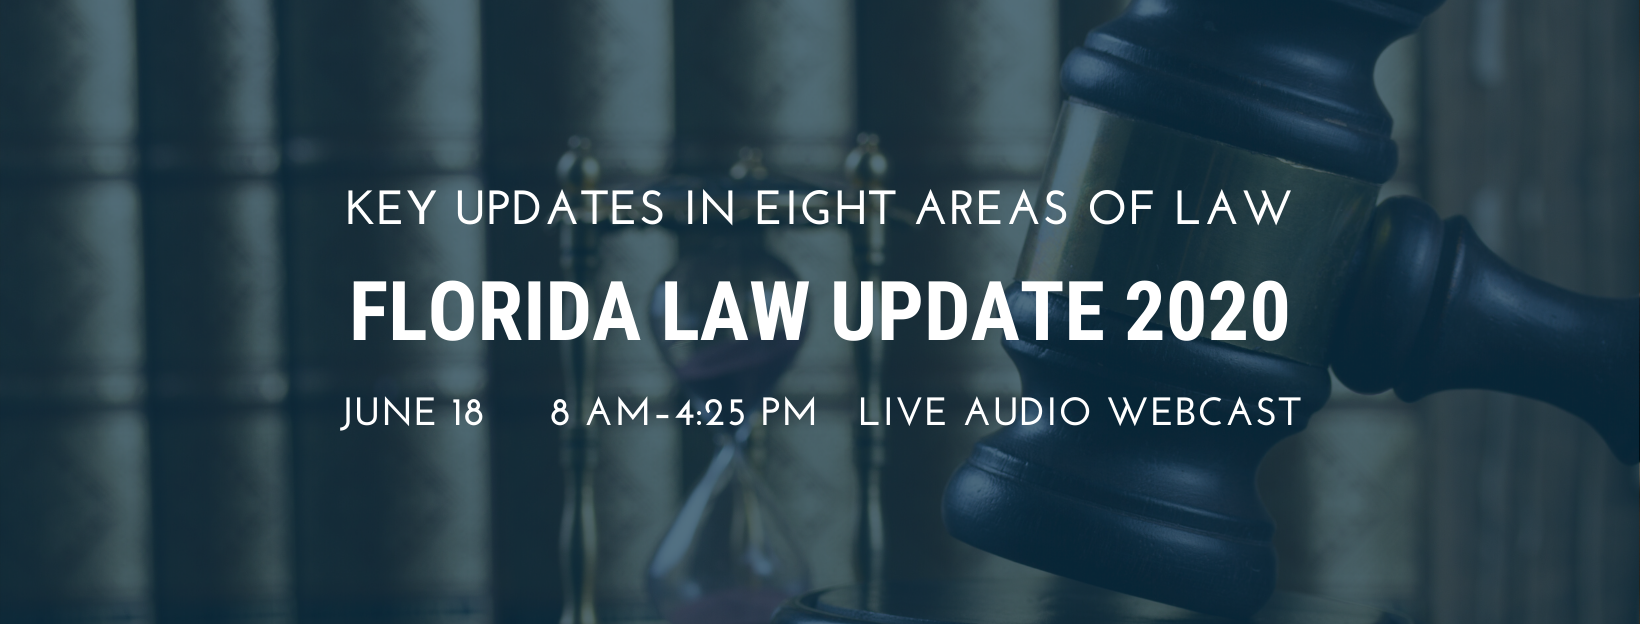 Florida Law Update 2020